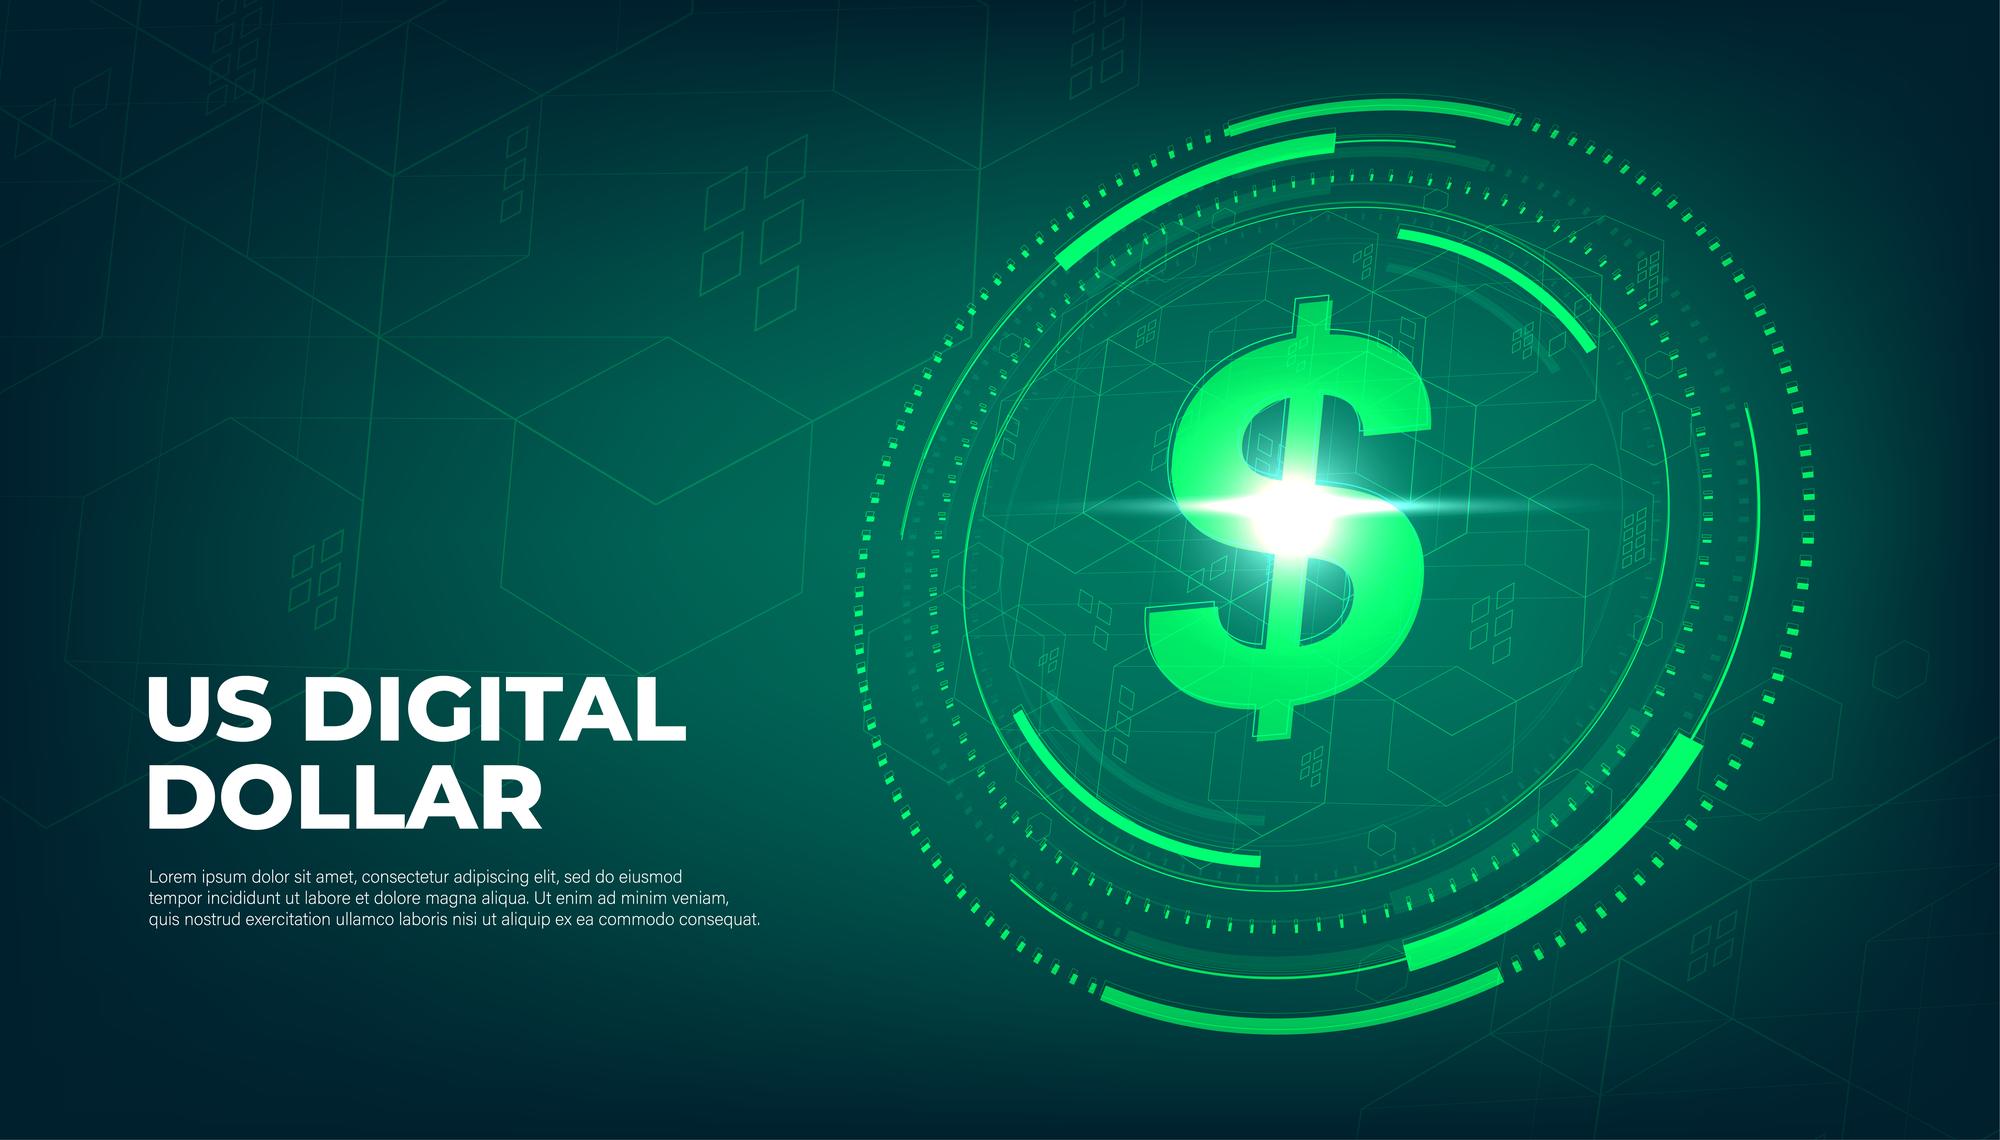 20230623124040 fpdl.in digital currency usa dollar sign us digital dollar futuristic digital money green abstract technology background vector 32996 2285 full